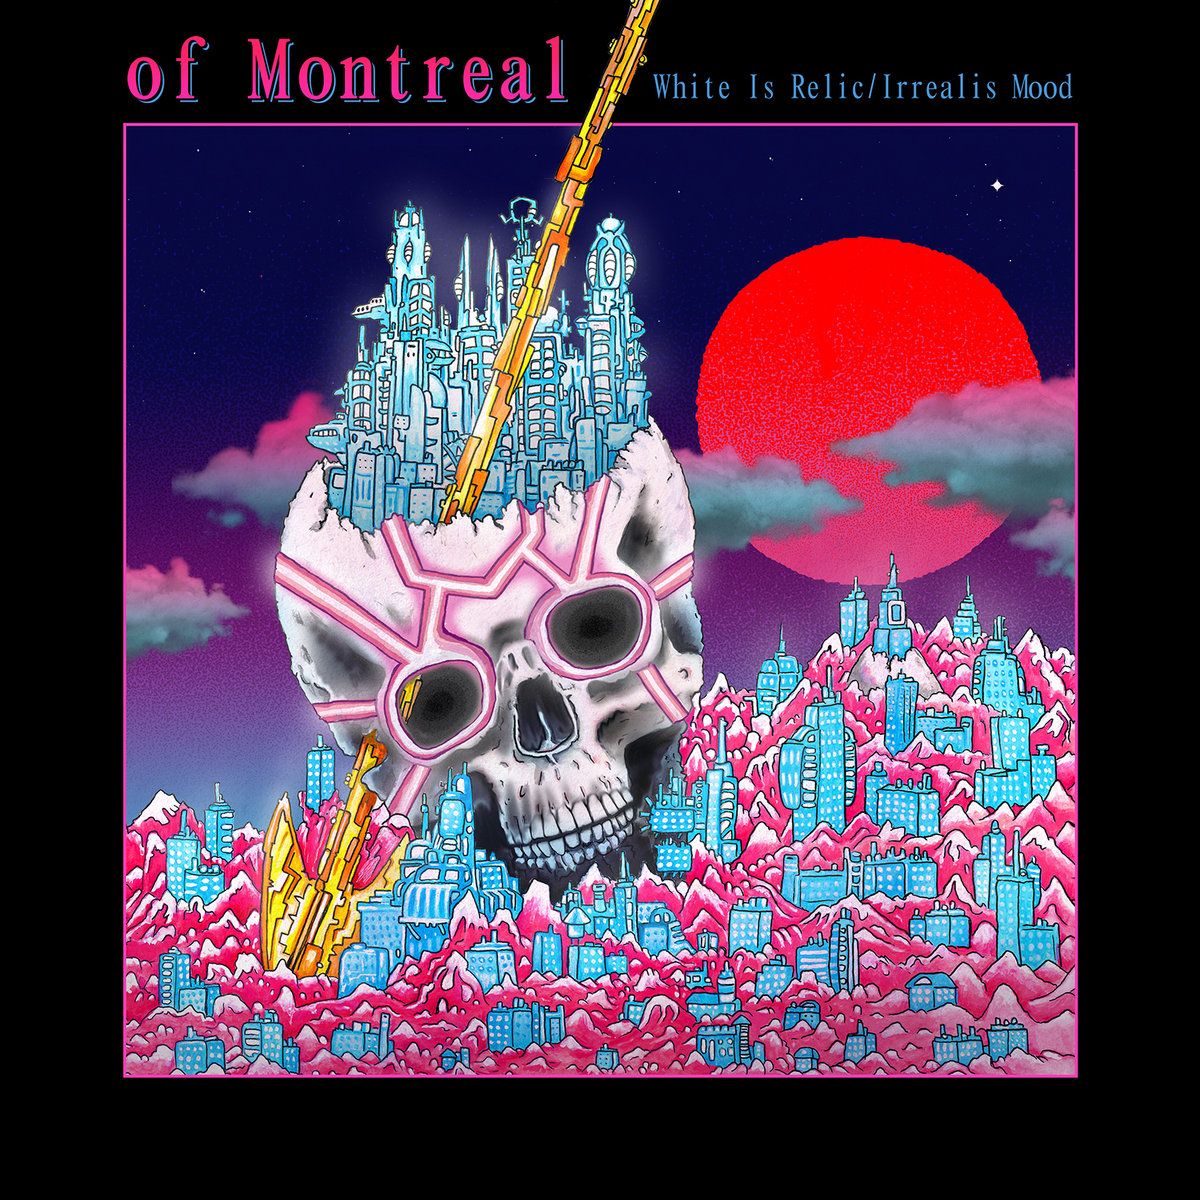 of Montreal releases EP ‘White Is Relic/Irrealis Mood’